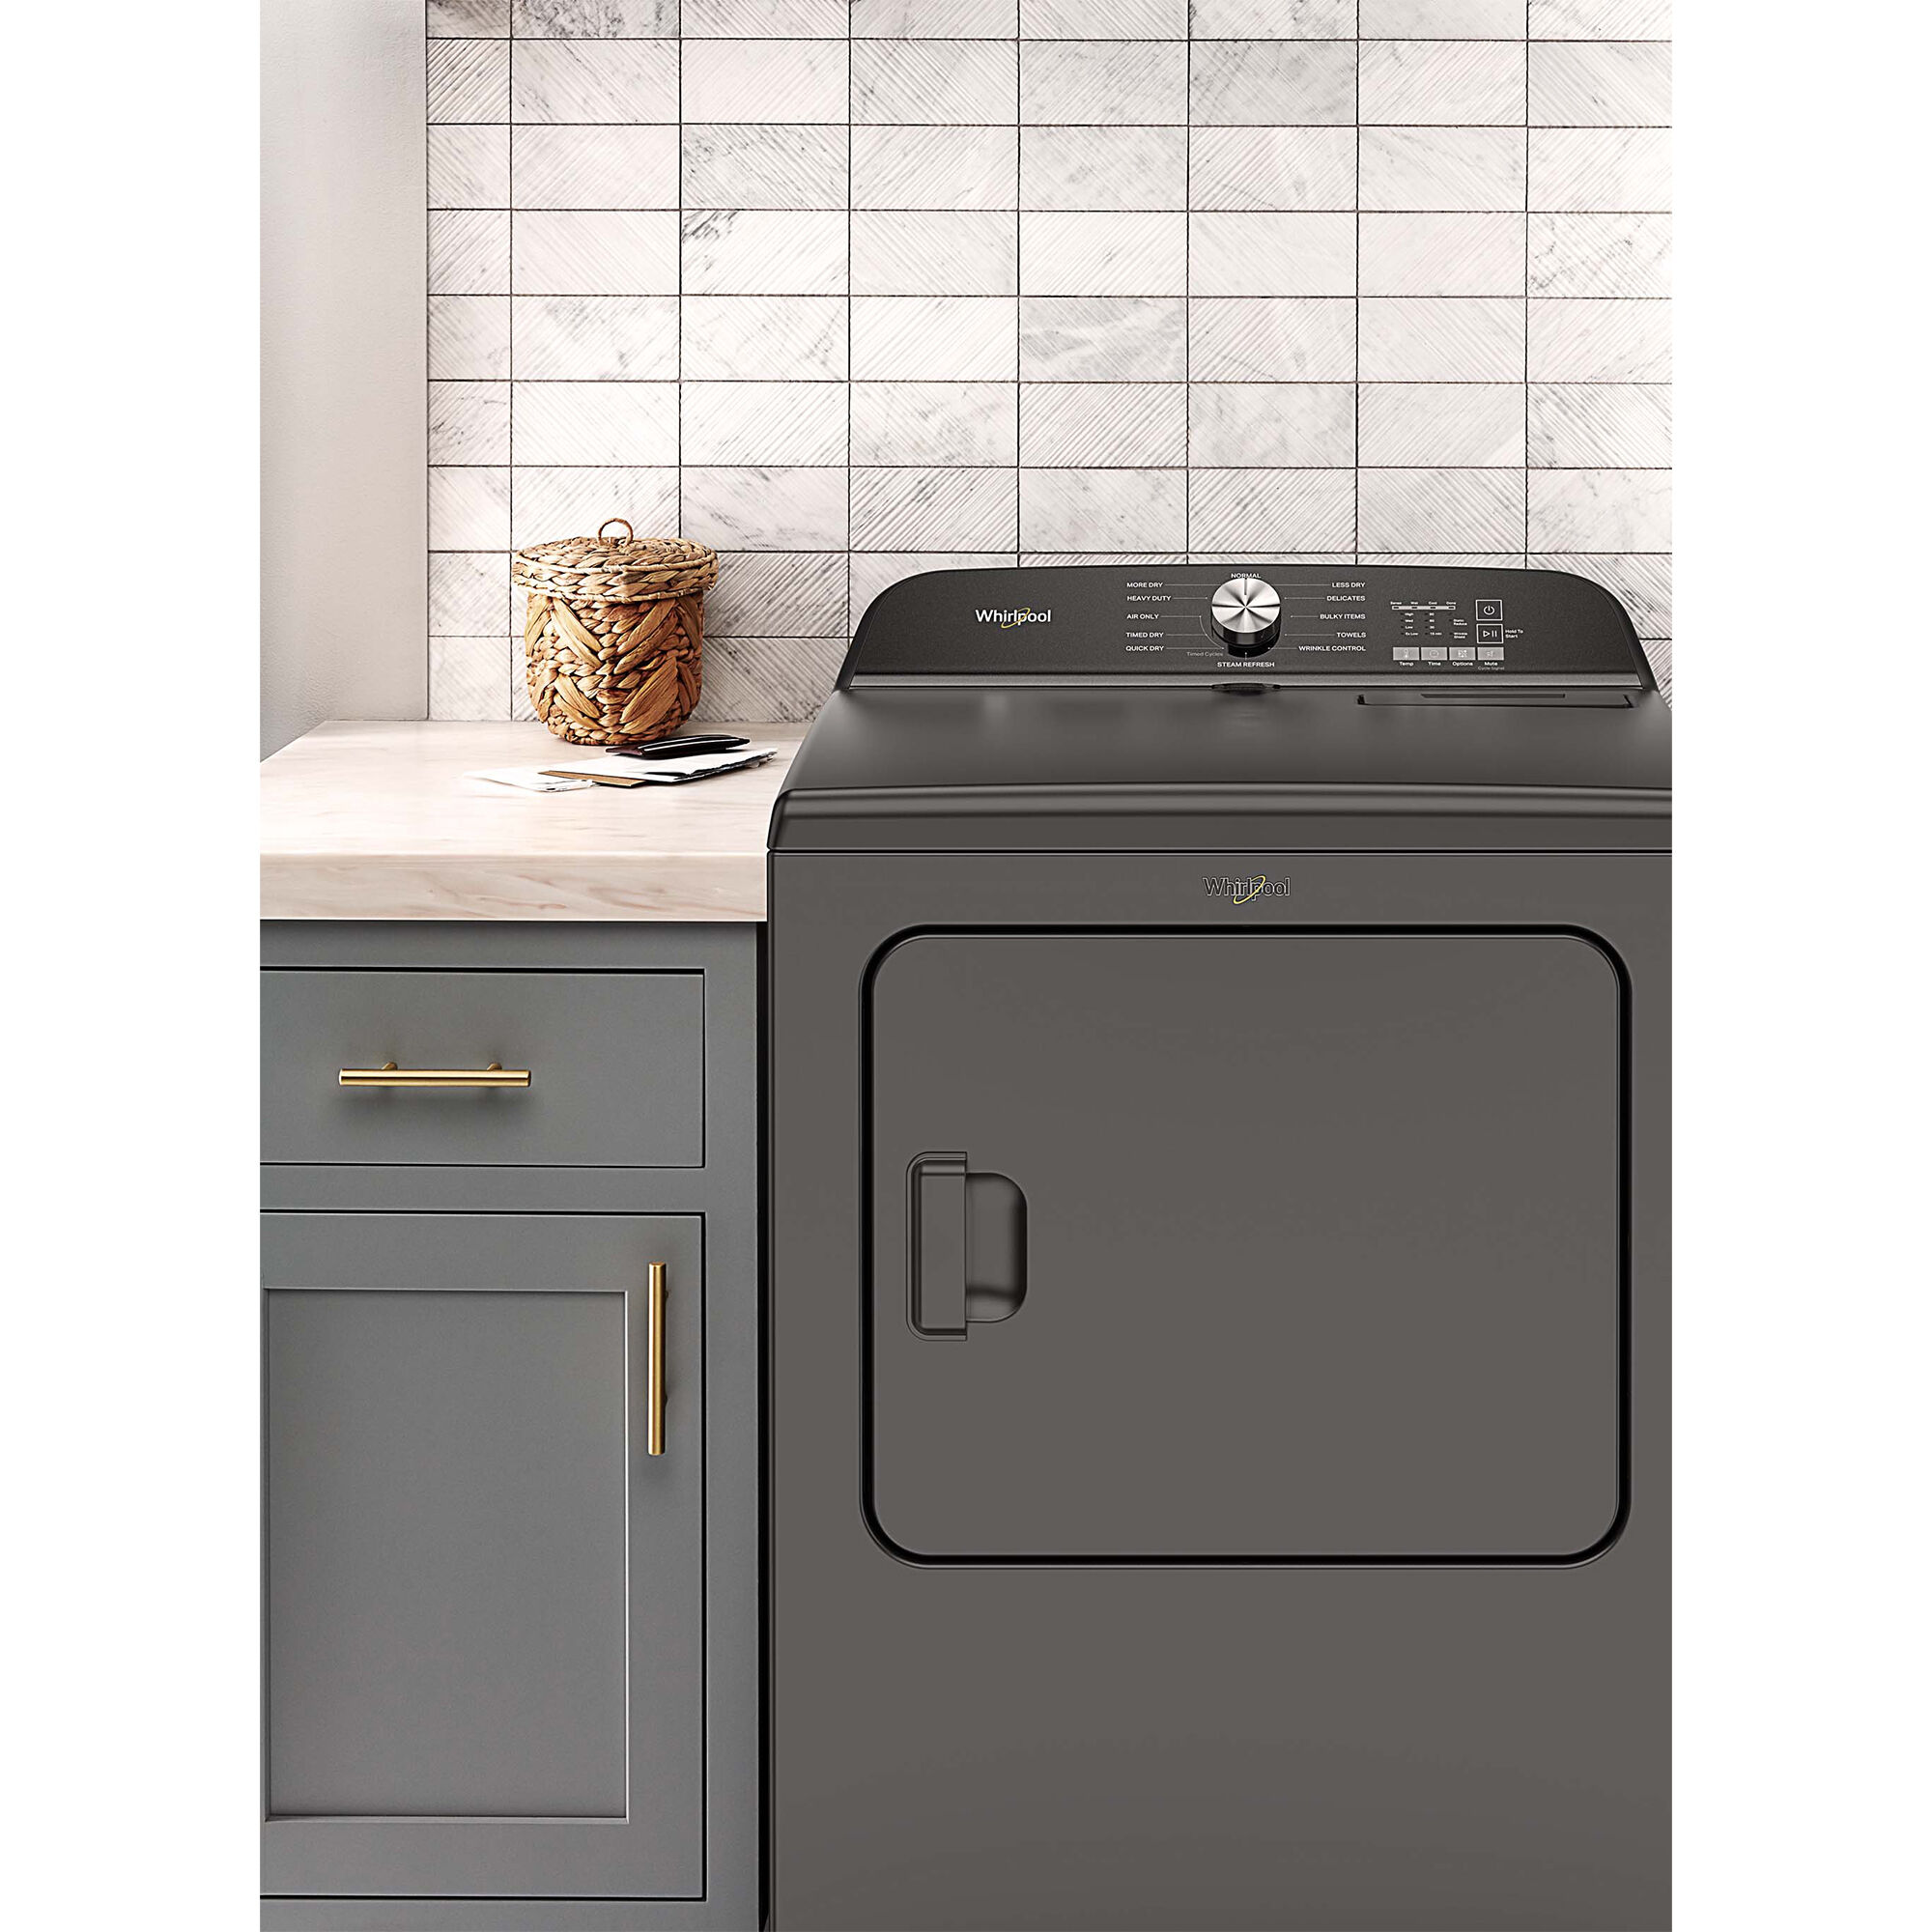 Whirlpool 29 in. 7.0 cu. ft. Electric Dryer with Wrinkle Shield Option,  Steam Cycle & Sensor Dry - Volcano Black